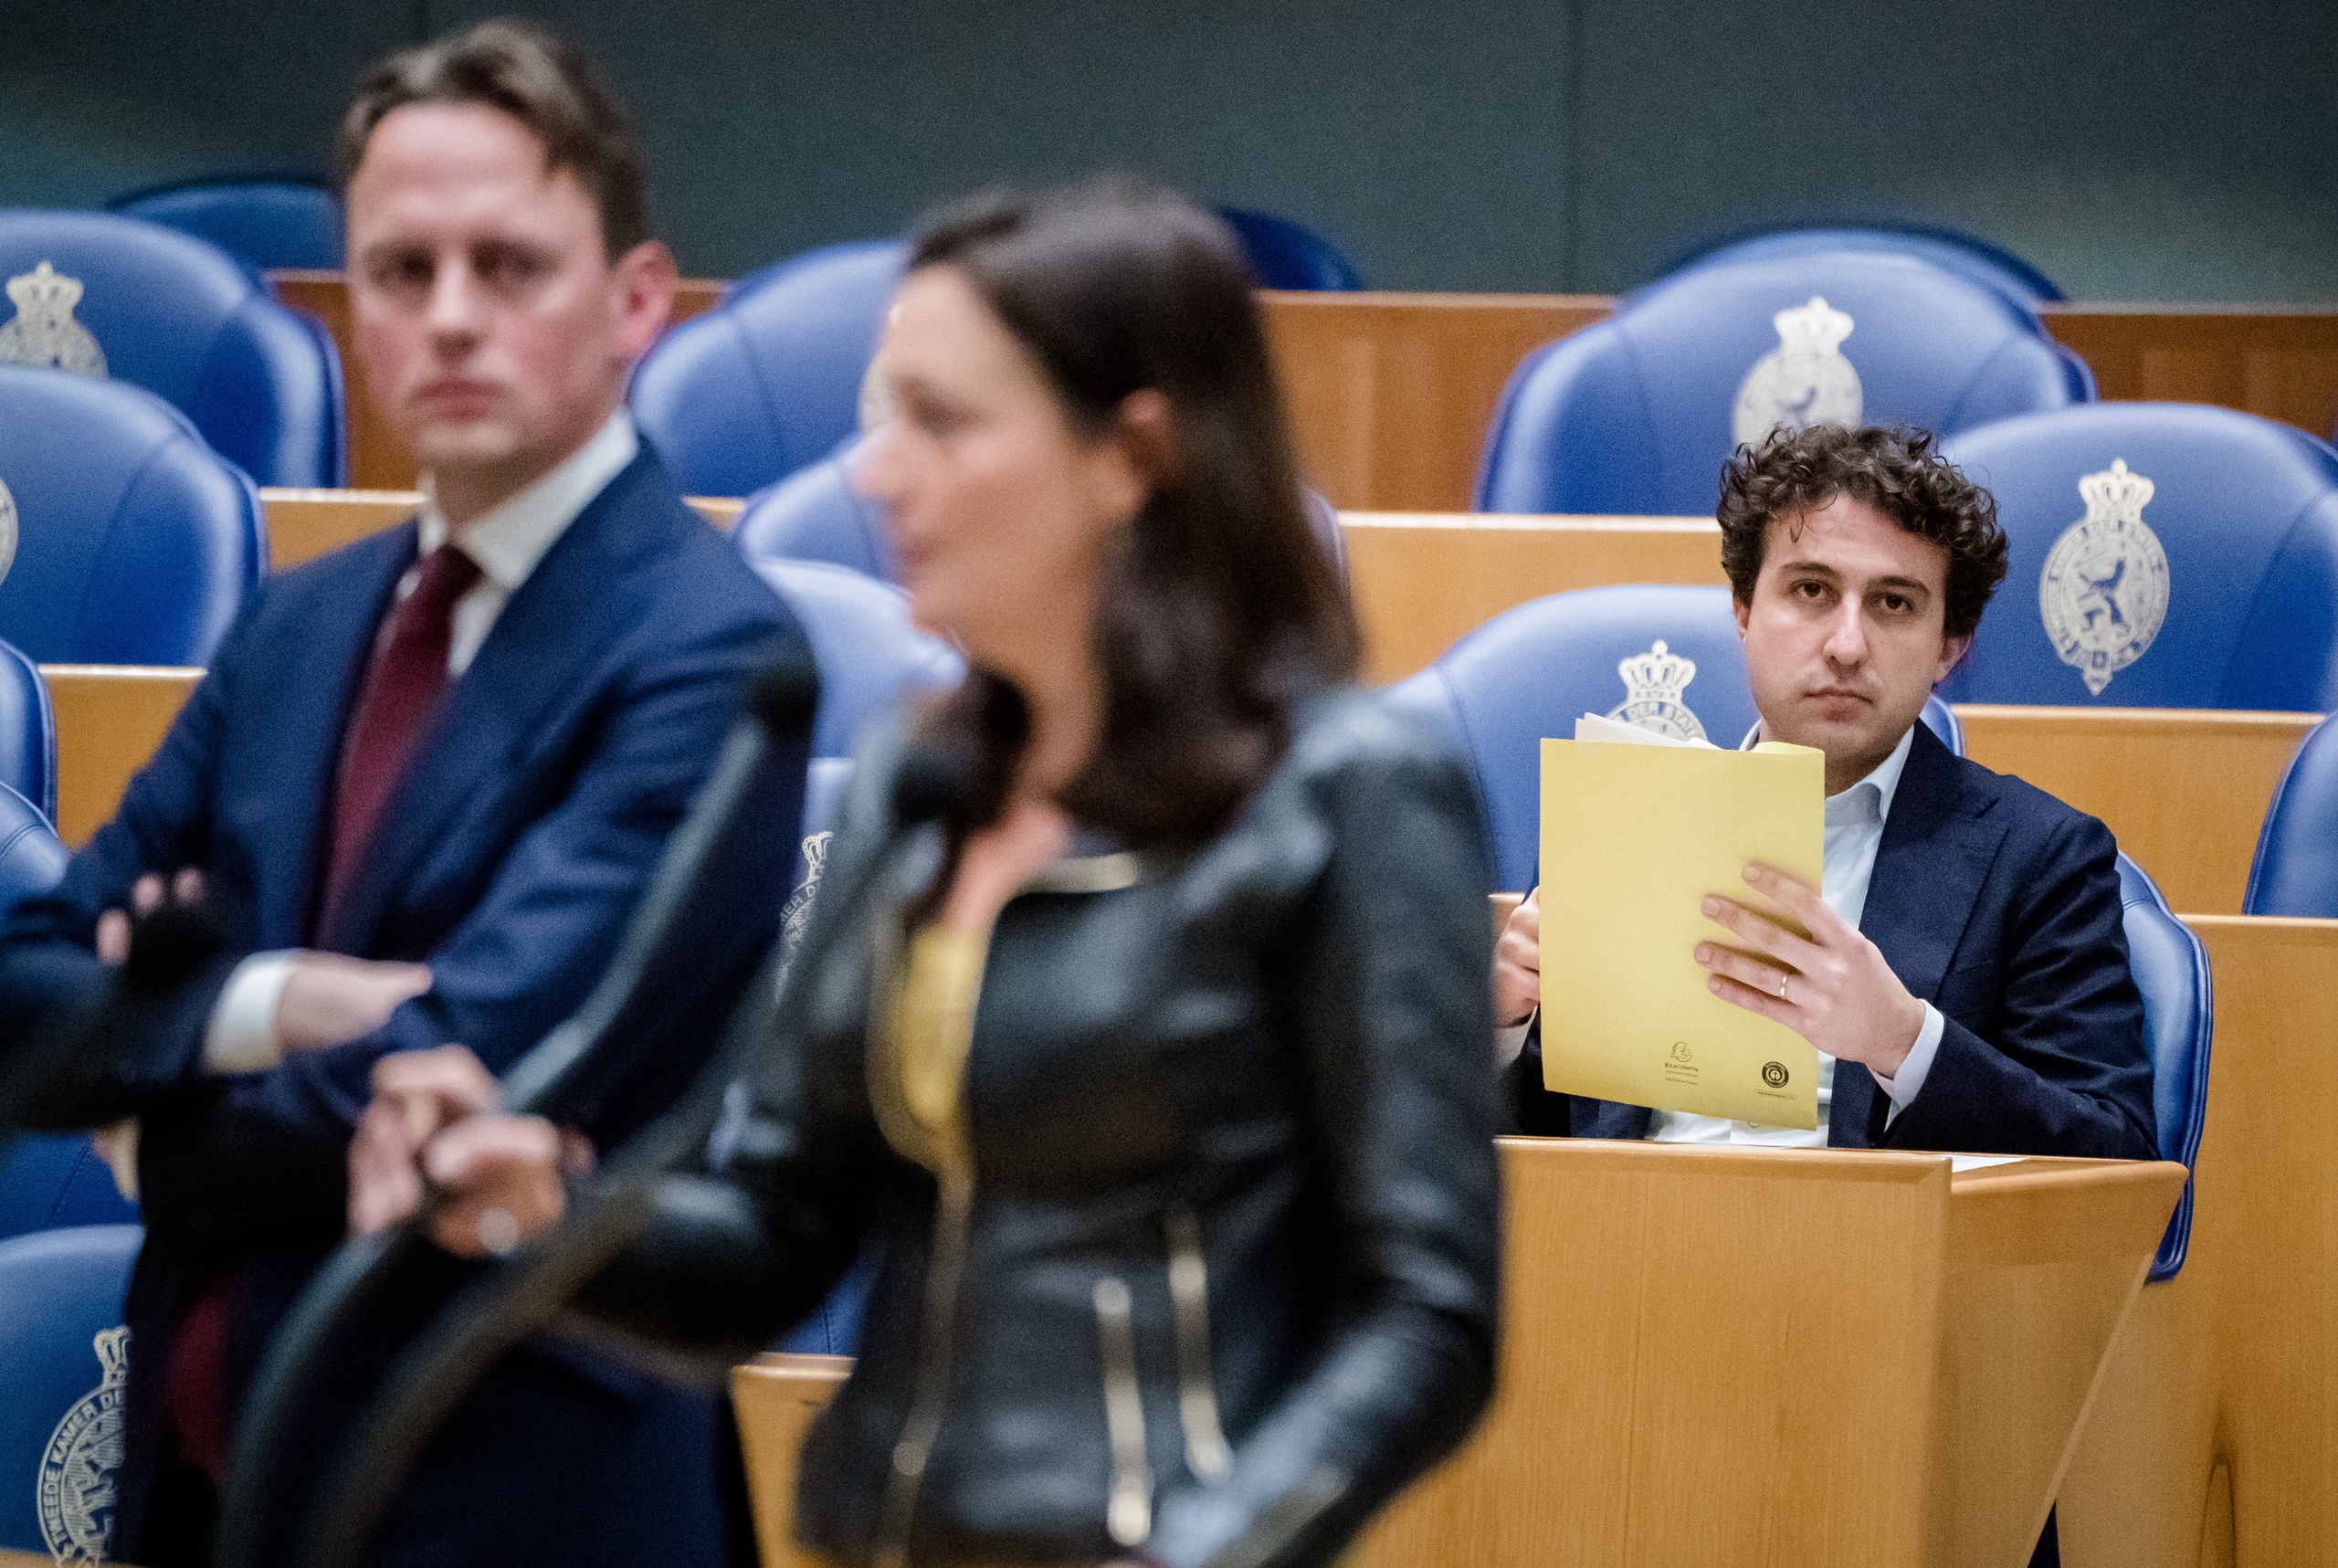 (VLNR) Henk Nijboer (Pvda), Sandra Beckerman (SP) and Jesse Klaver (Groenlinks).  The left-wing opposition is not yet satisfied with the cabinet's plans for the earthquake area in Groningen.